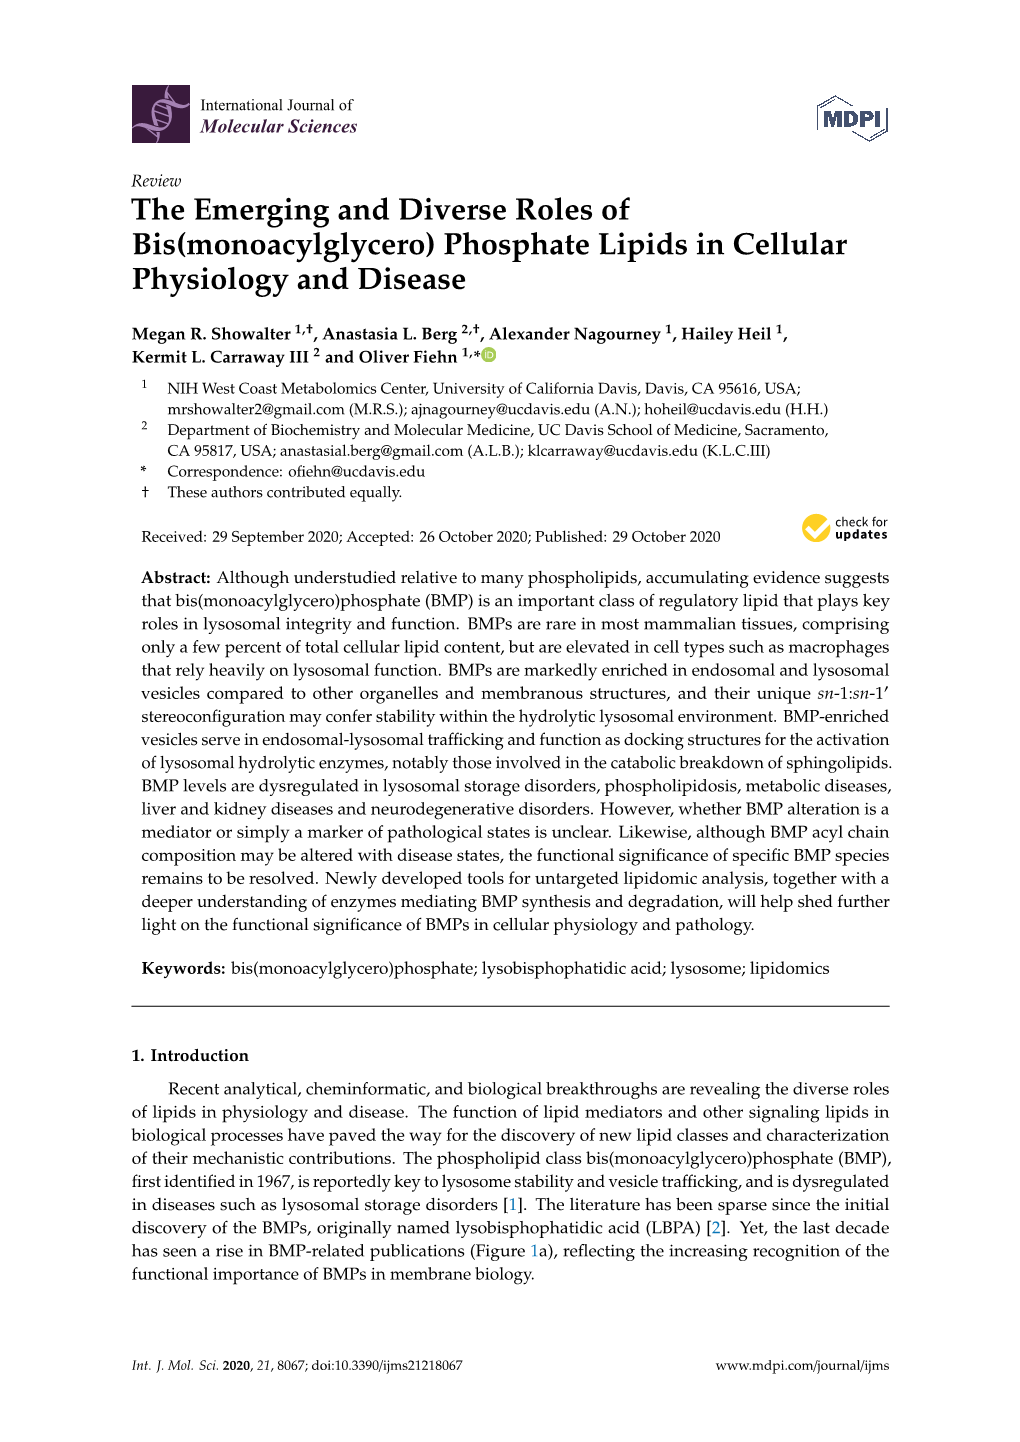 The Emerging and Diverse Roles of Bis(Monoacylglycero) Phosphate Lipids in Cellular Physiology and Disease